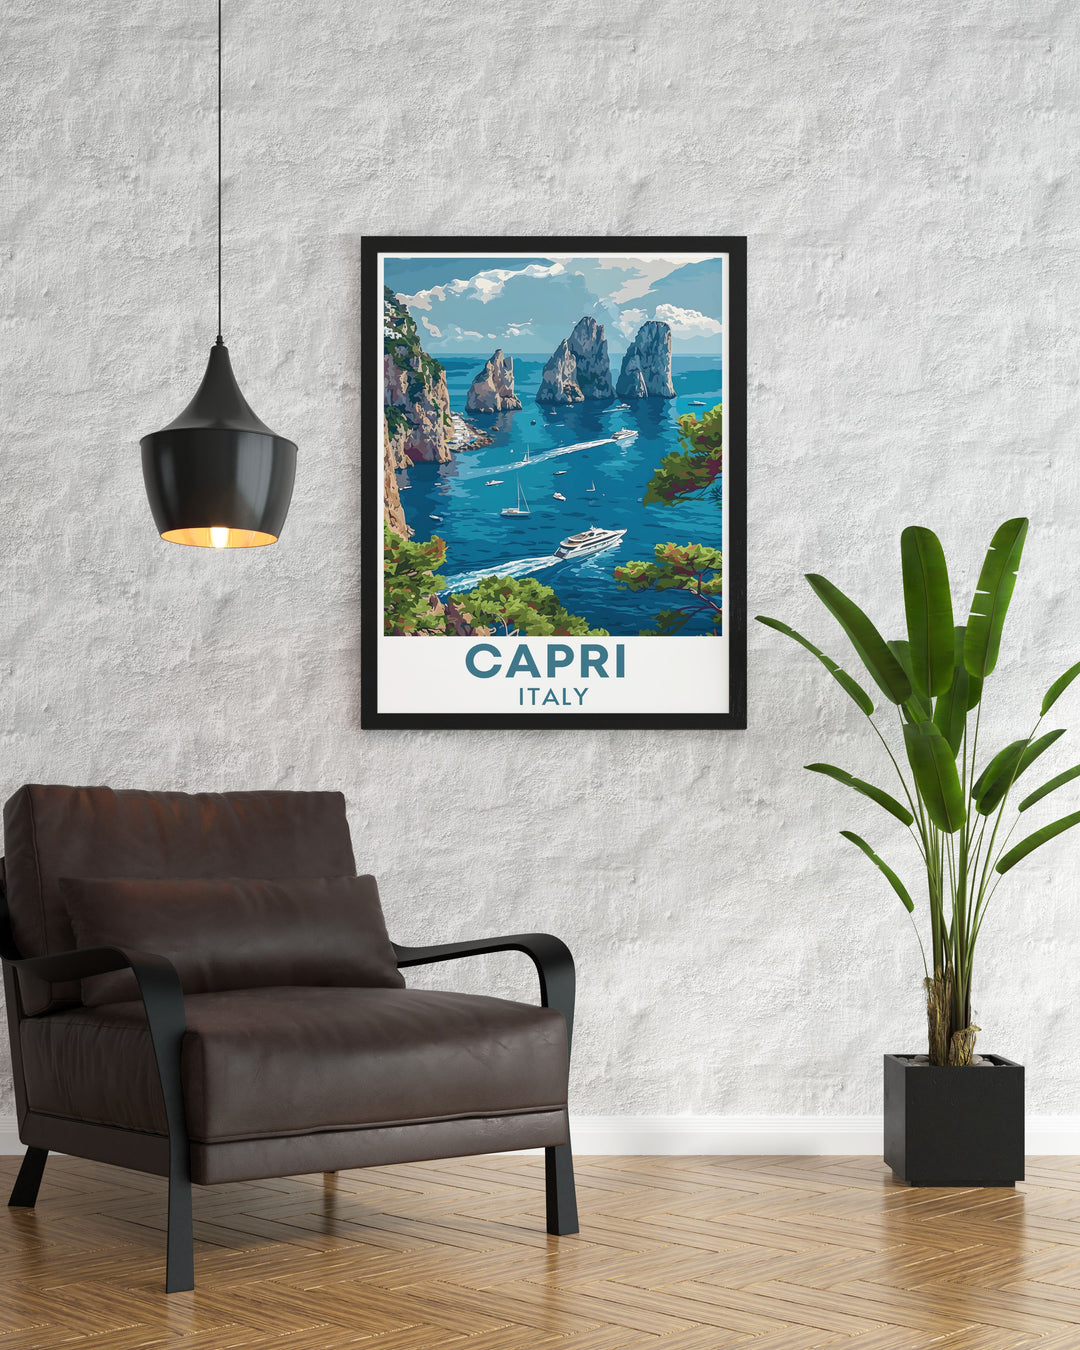 This travel poster captures the iconic Faraglioni Rocks of Capri, featuring their striking limestone formations and panoramic views. Ideal for adding a touch of the islands natural splendor to your home decor and celebrating one of Italys most beloved landmarks.